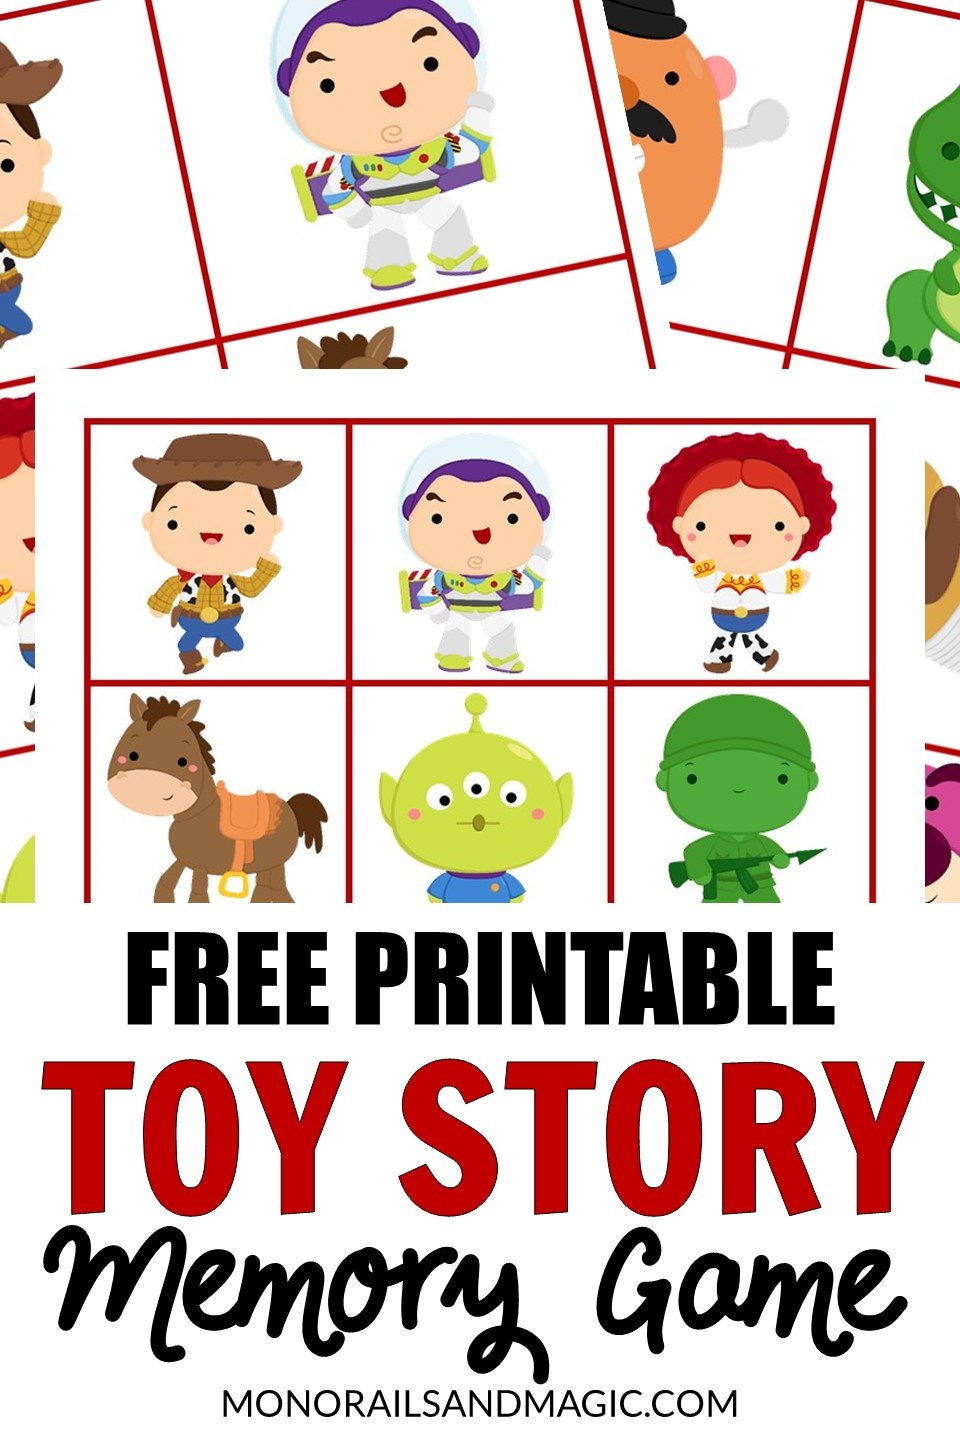 Free printable Toy Story memory game for kids.